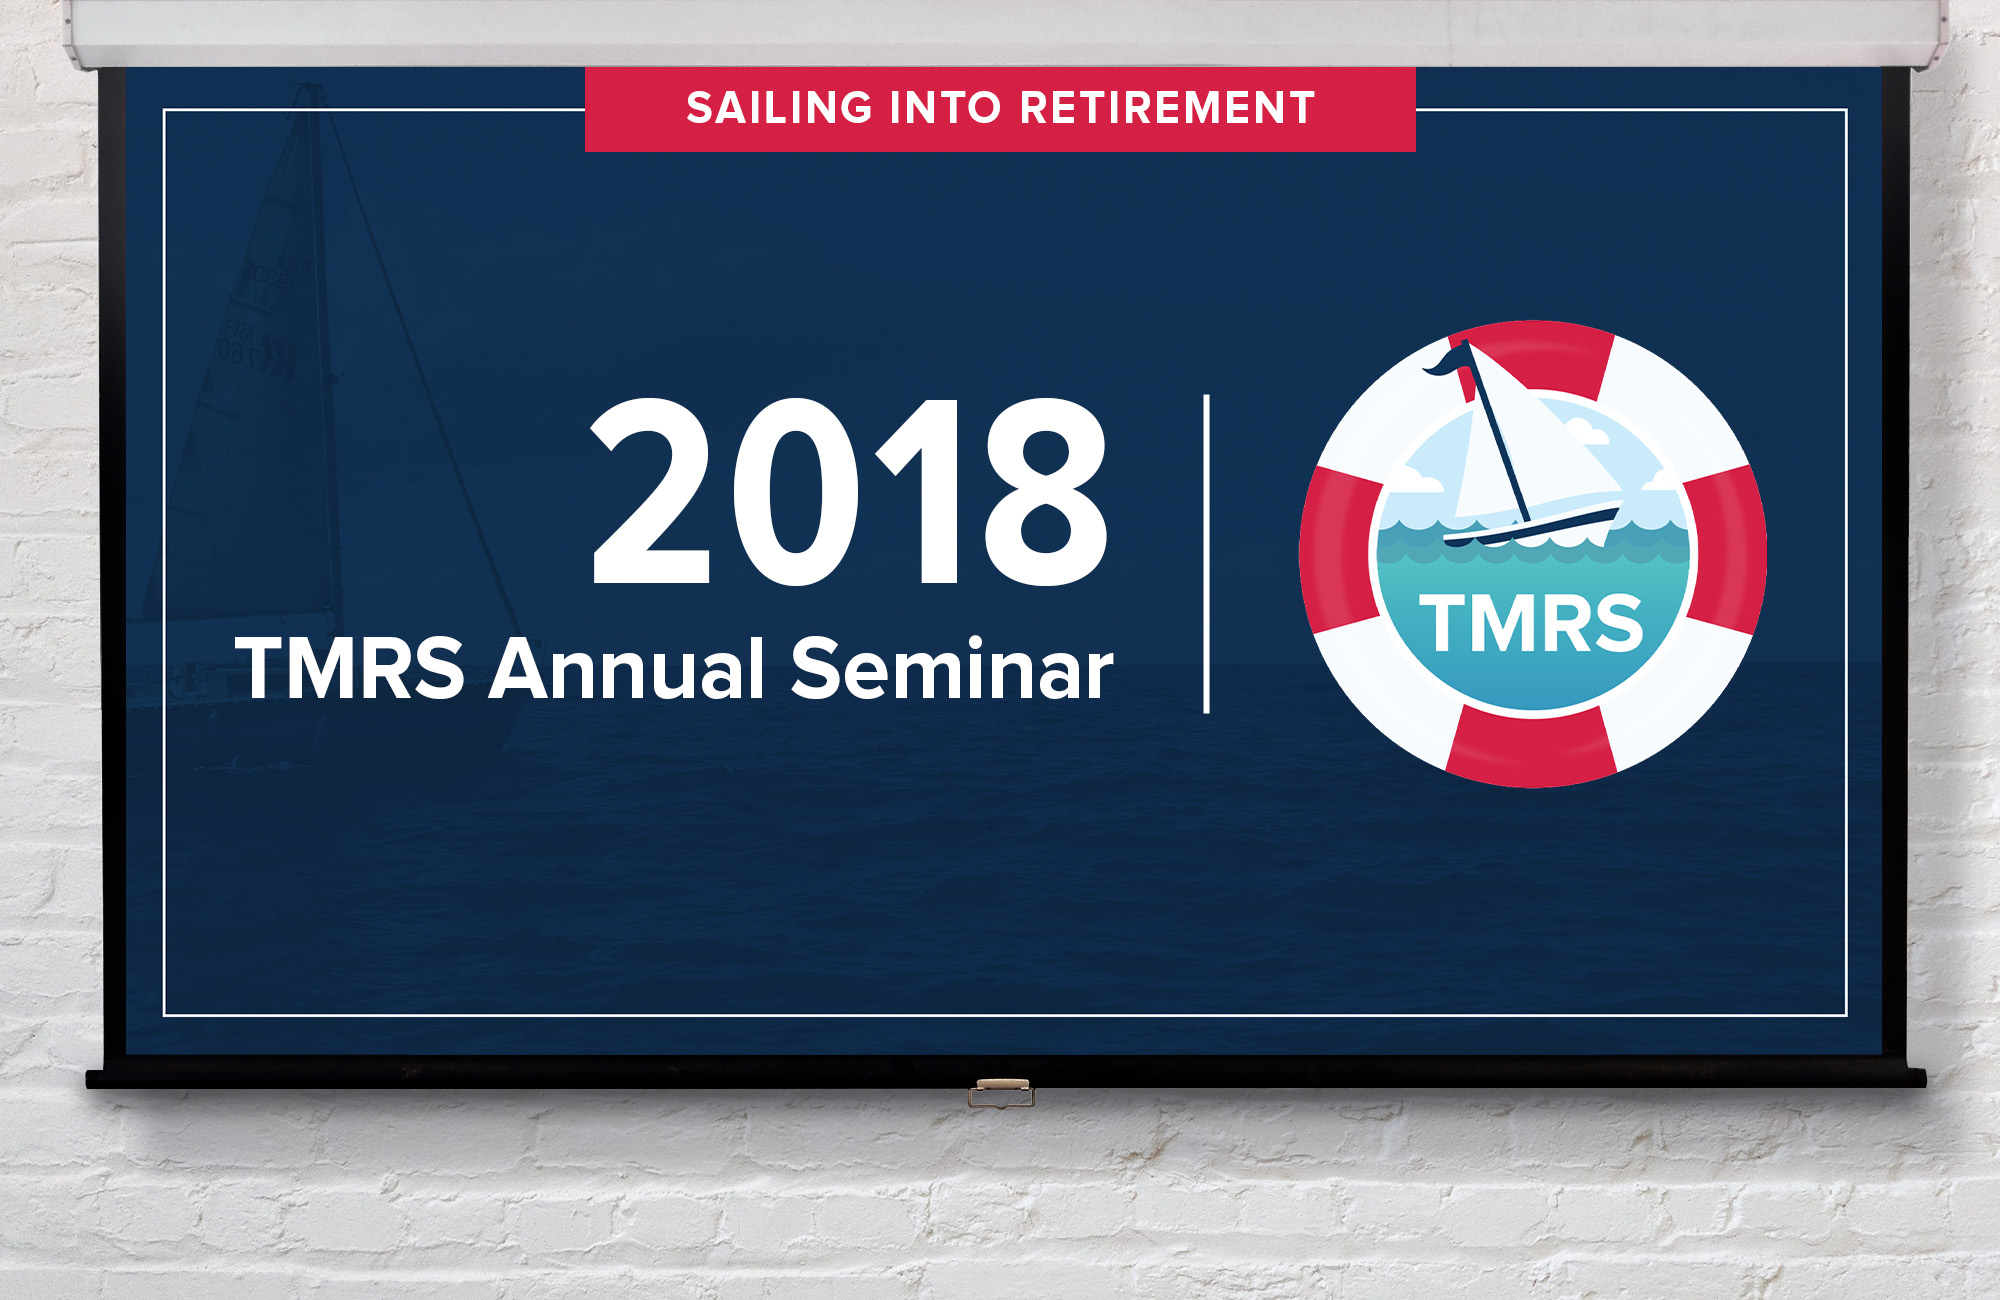 A projector screen in front of a white brick wall. The presentation projected onto the screen is a title slide that reads 2018 TMRS Annual Seminar.